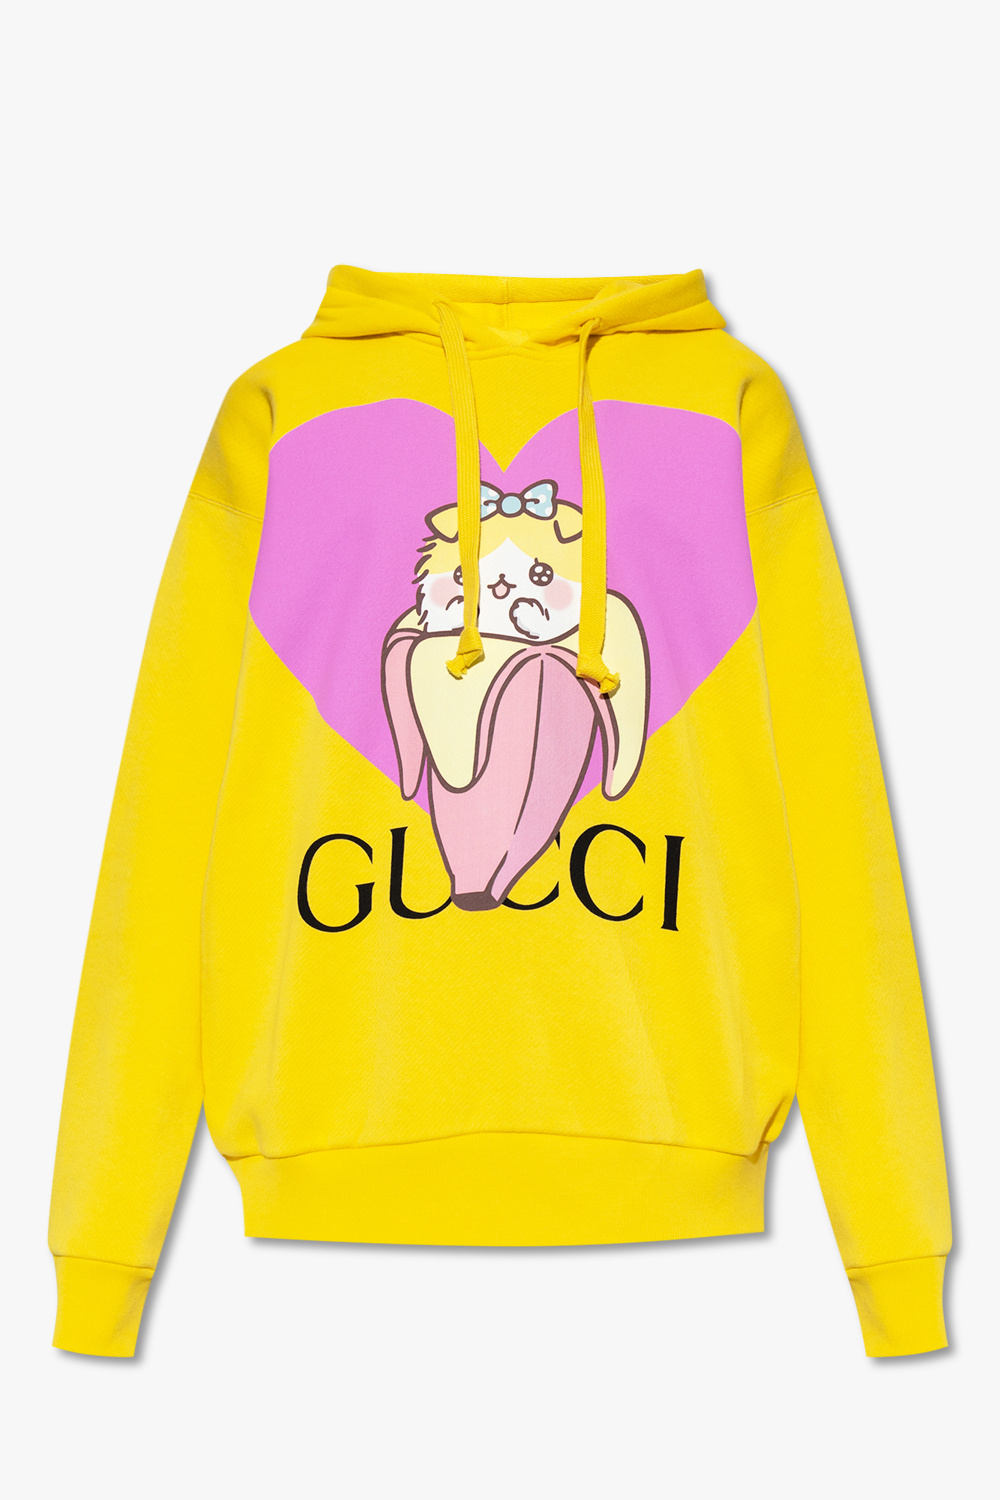 Gucci 615061 Sweater Hoodie sz XS from Japan 